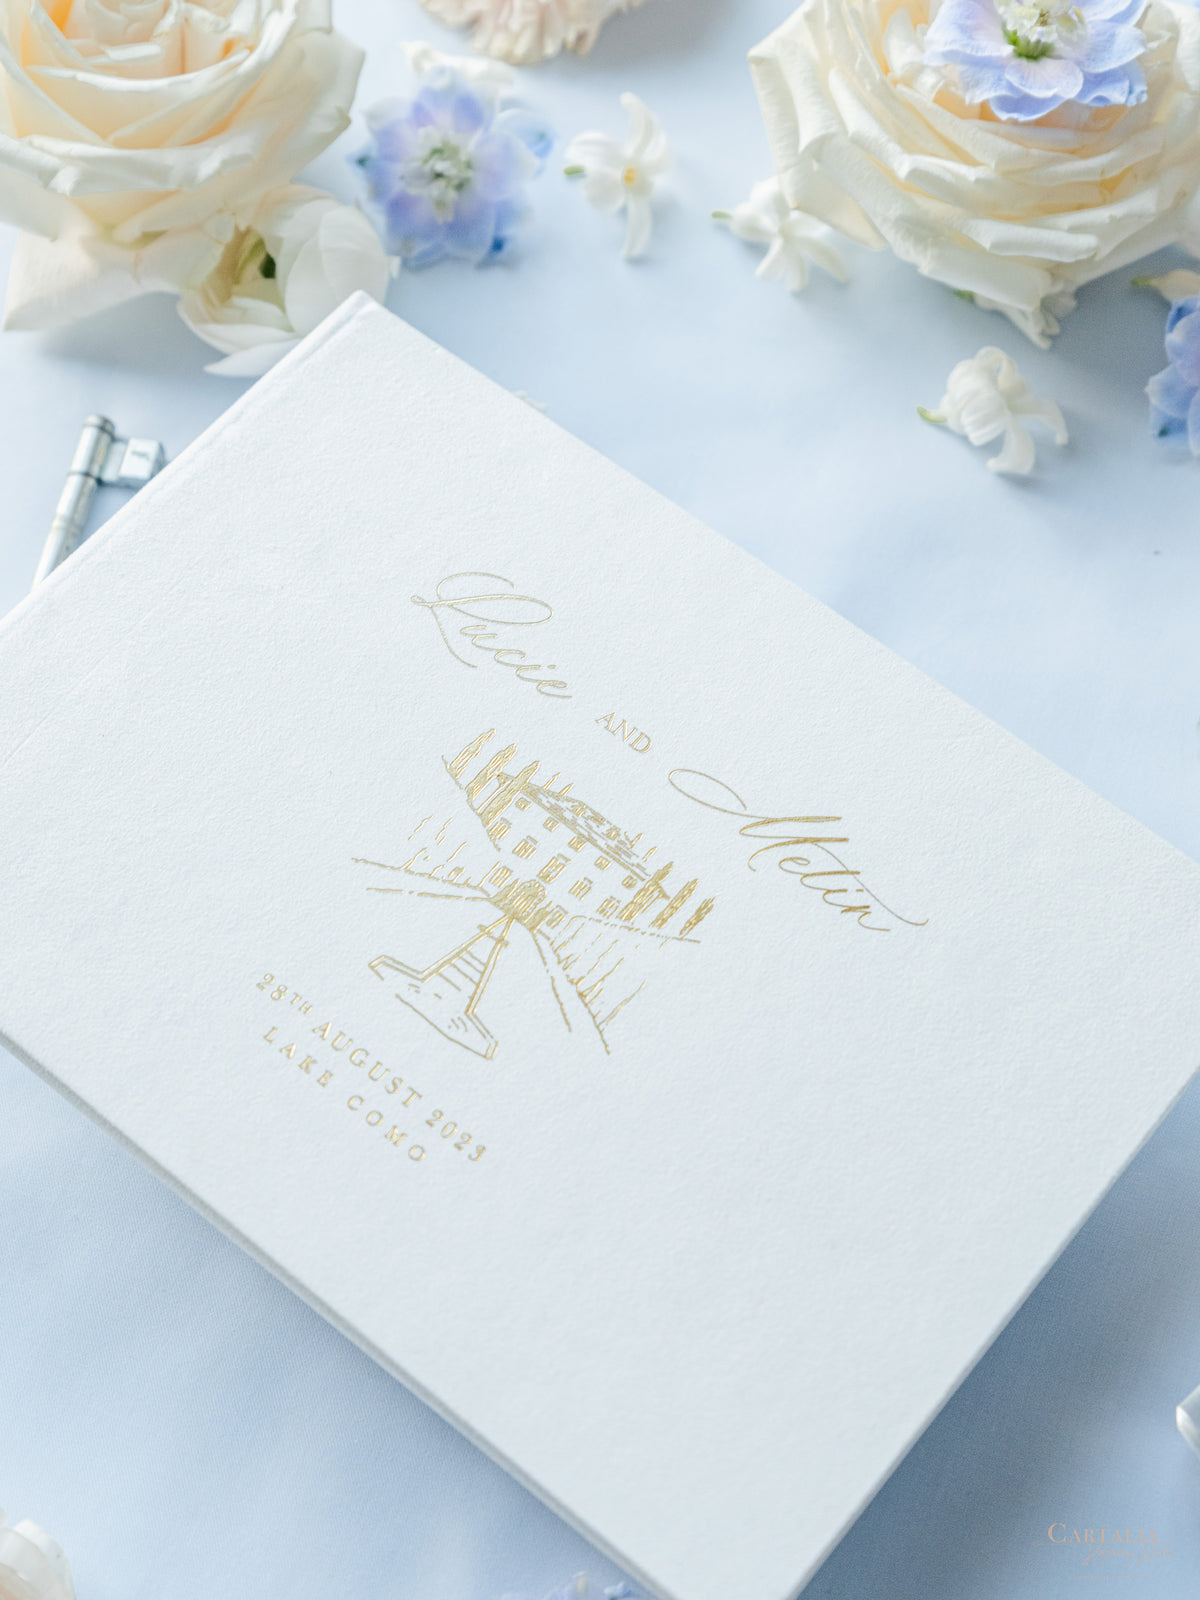 Personalized White Velvet Wedding Guest Book with Gold Foil Details | Villa Balbiano, Lake Como